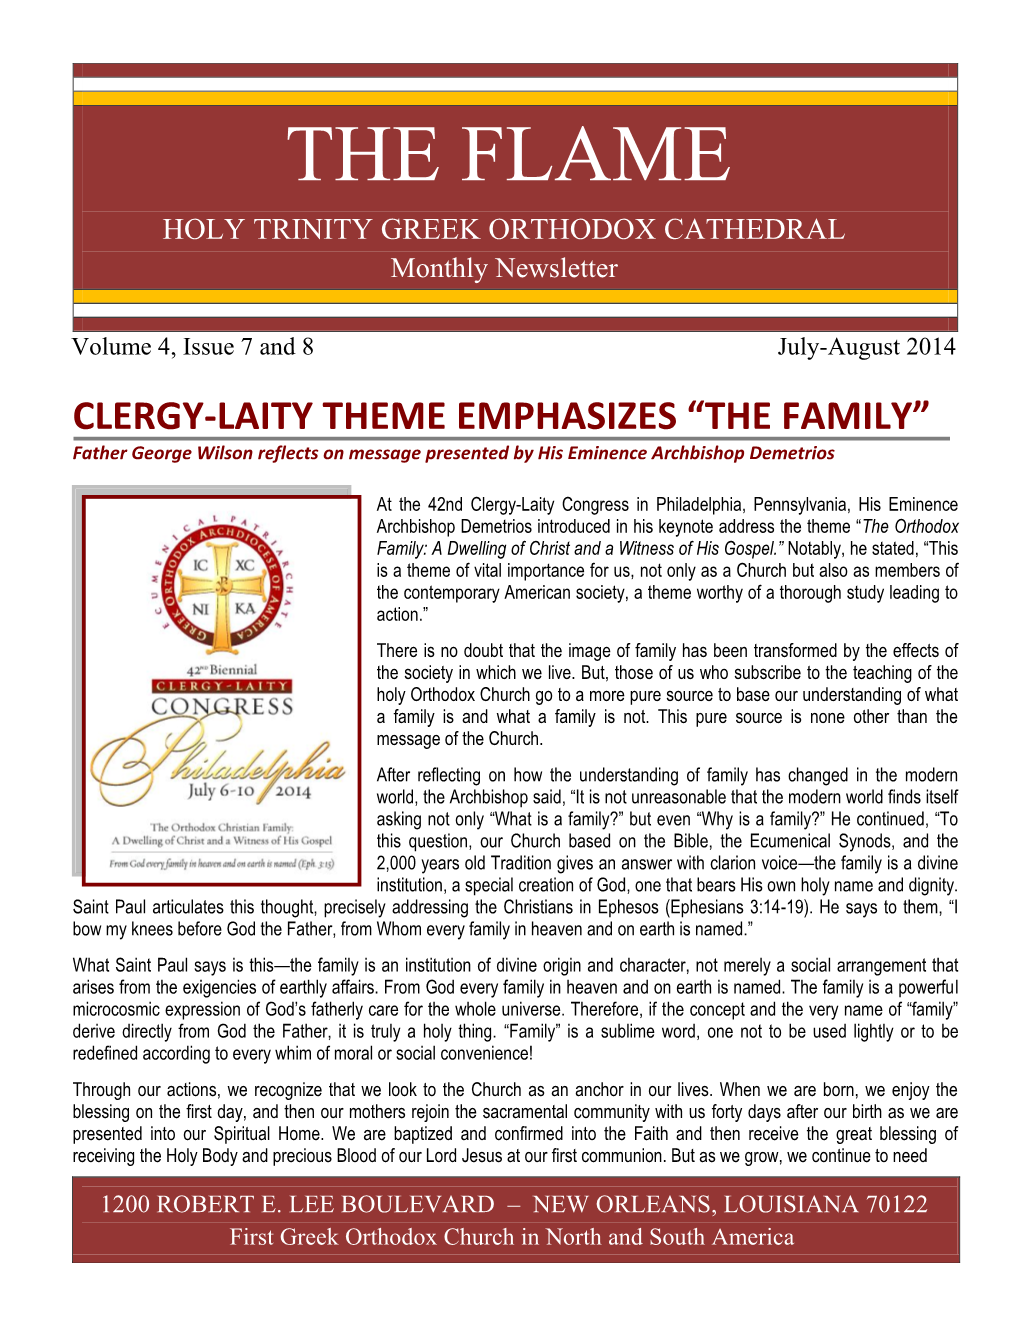 THE FLAME HOLY TRINITY GREEK ORTHODOX CATHEDRAL Monthly Newsletter